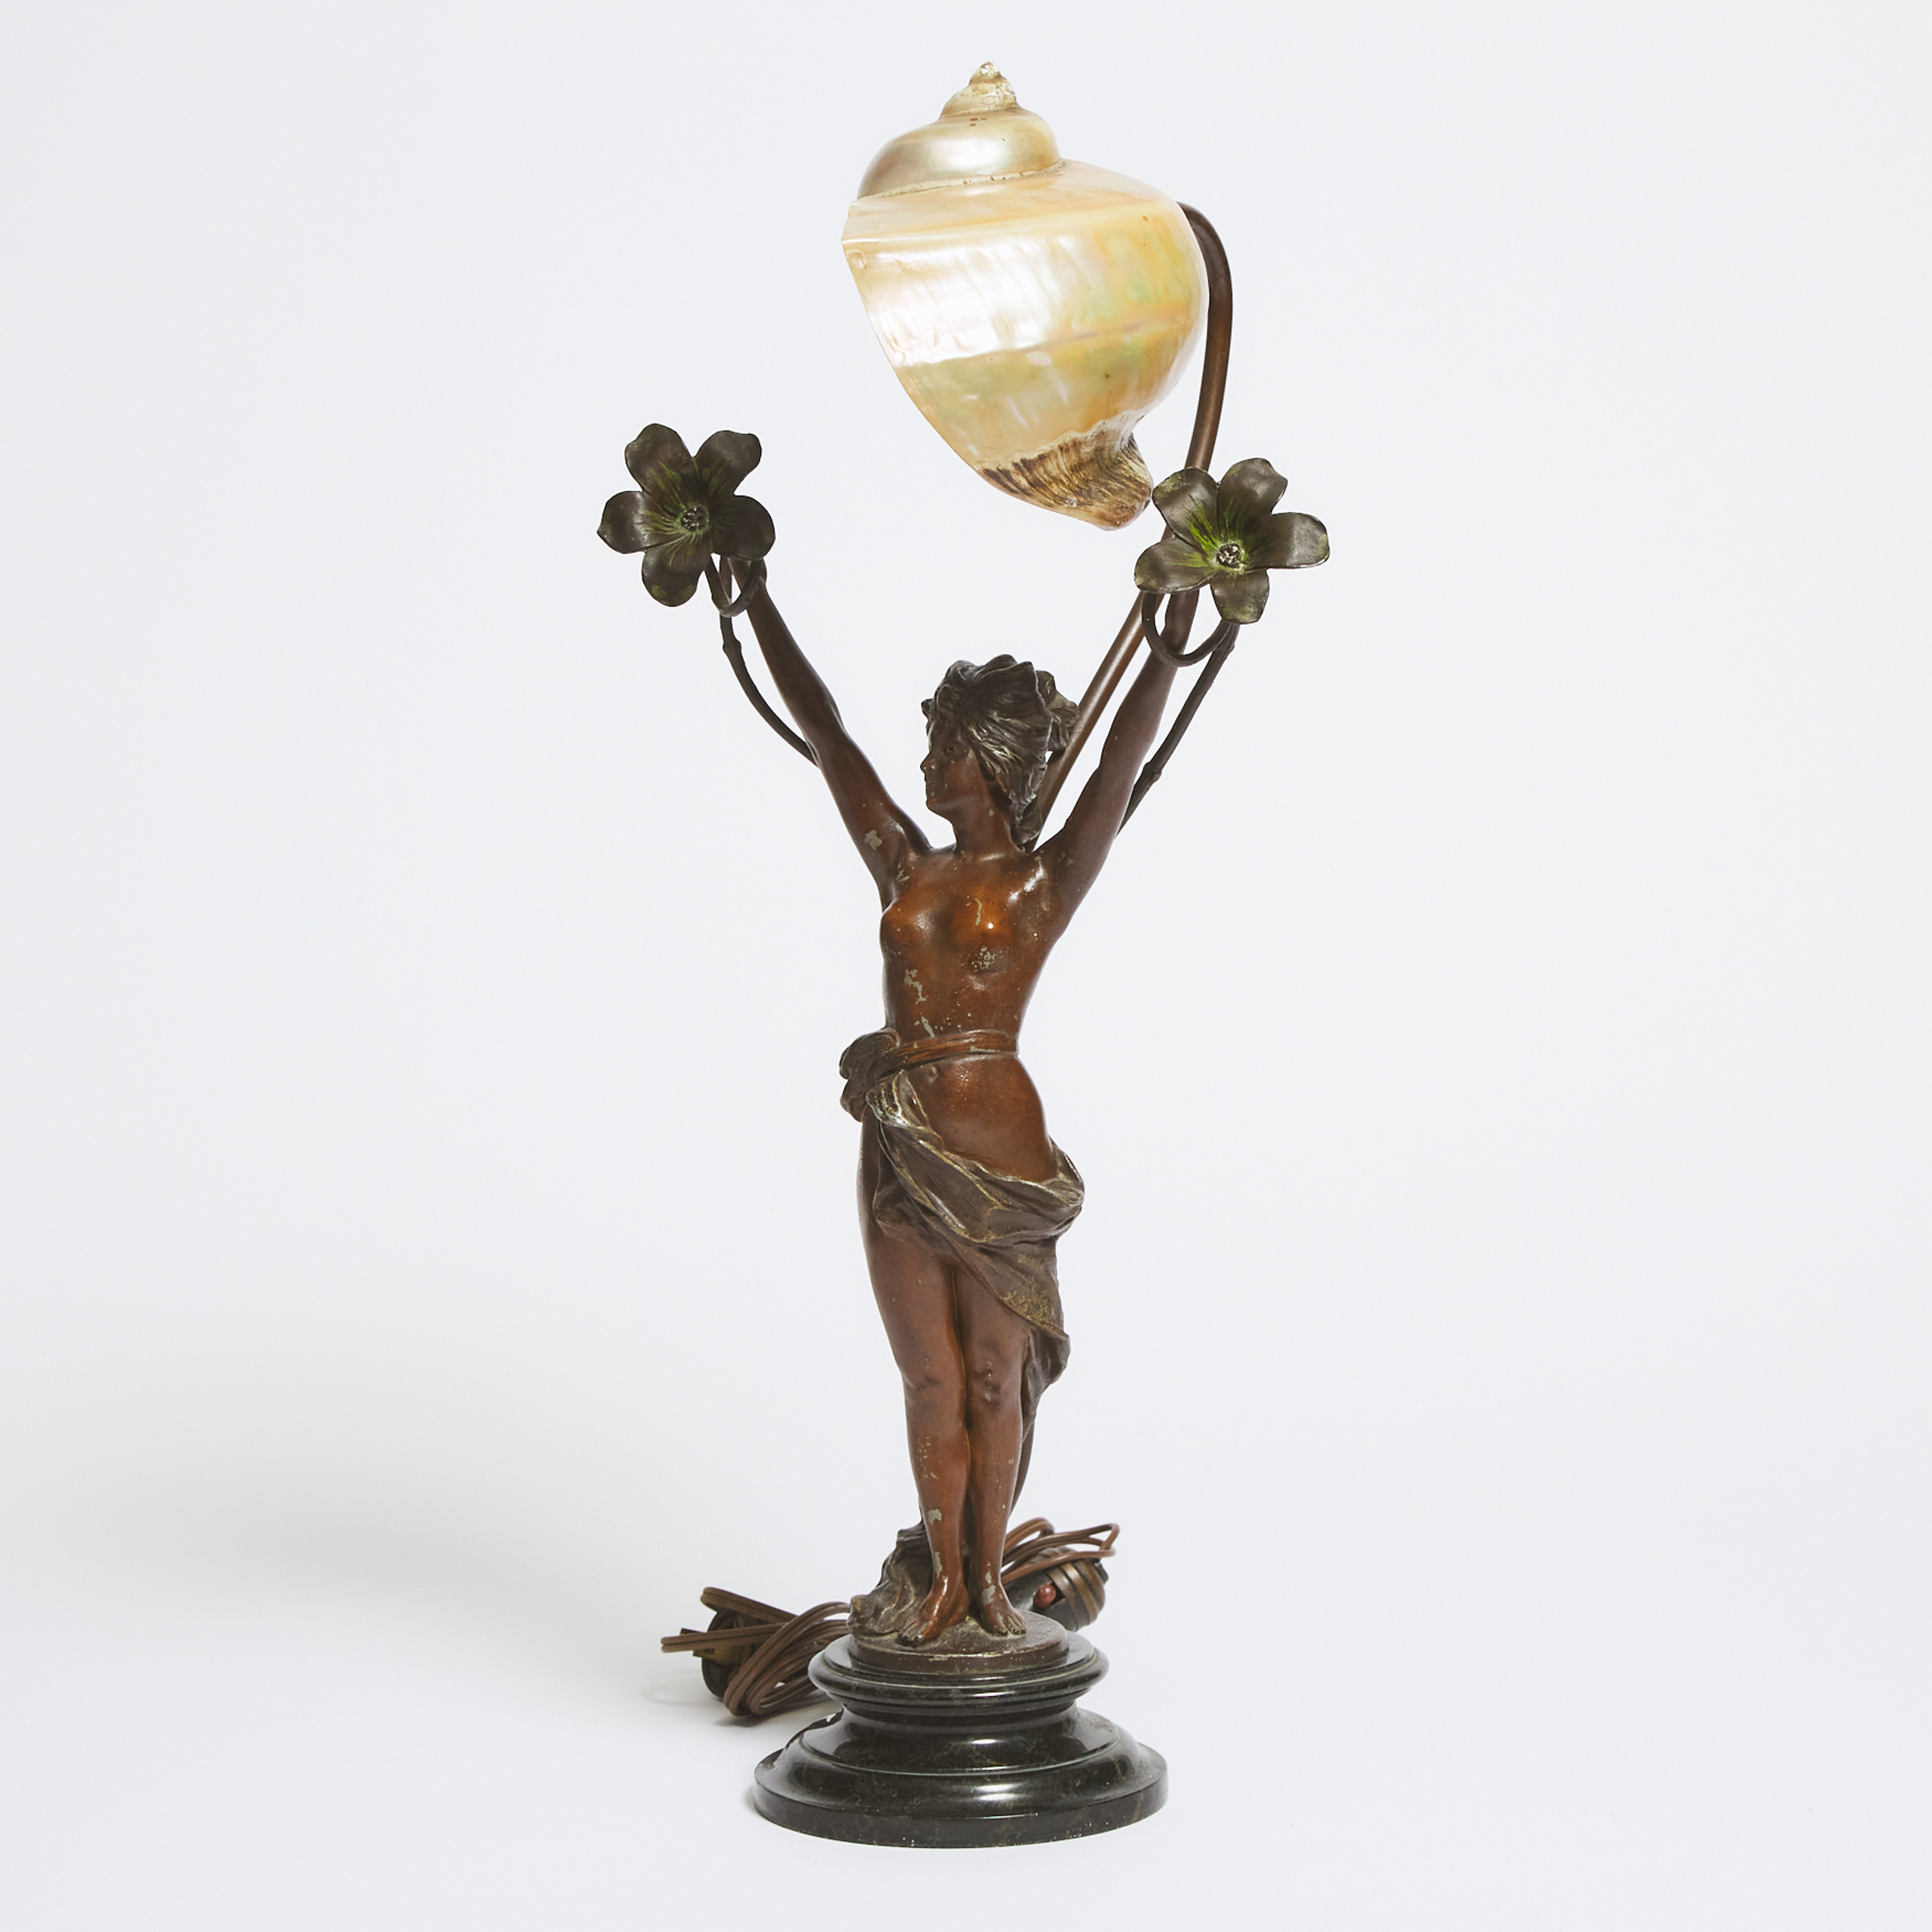 Art Nouveau Patinated Metal Figural Table Lamp with Natural Shell Shade, c.1900